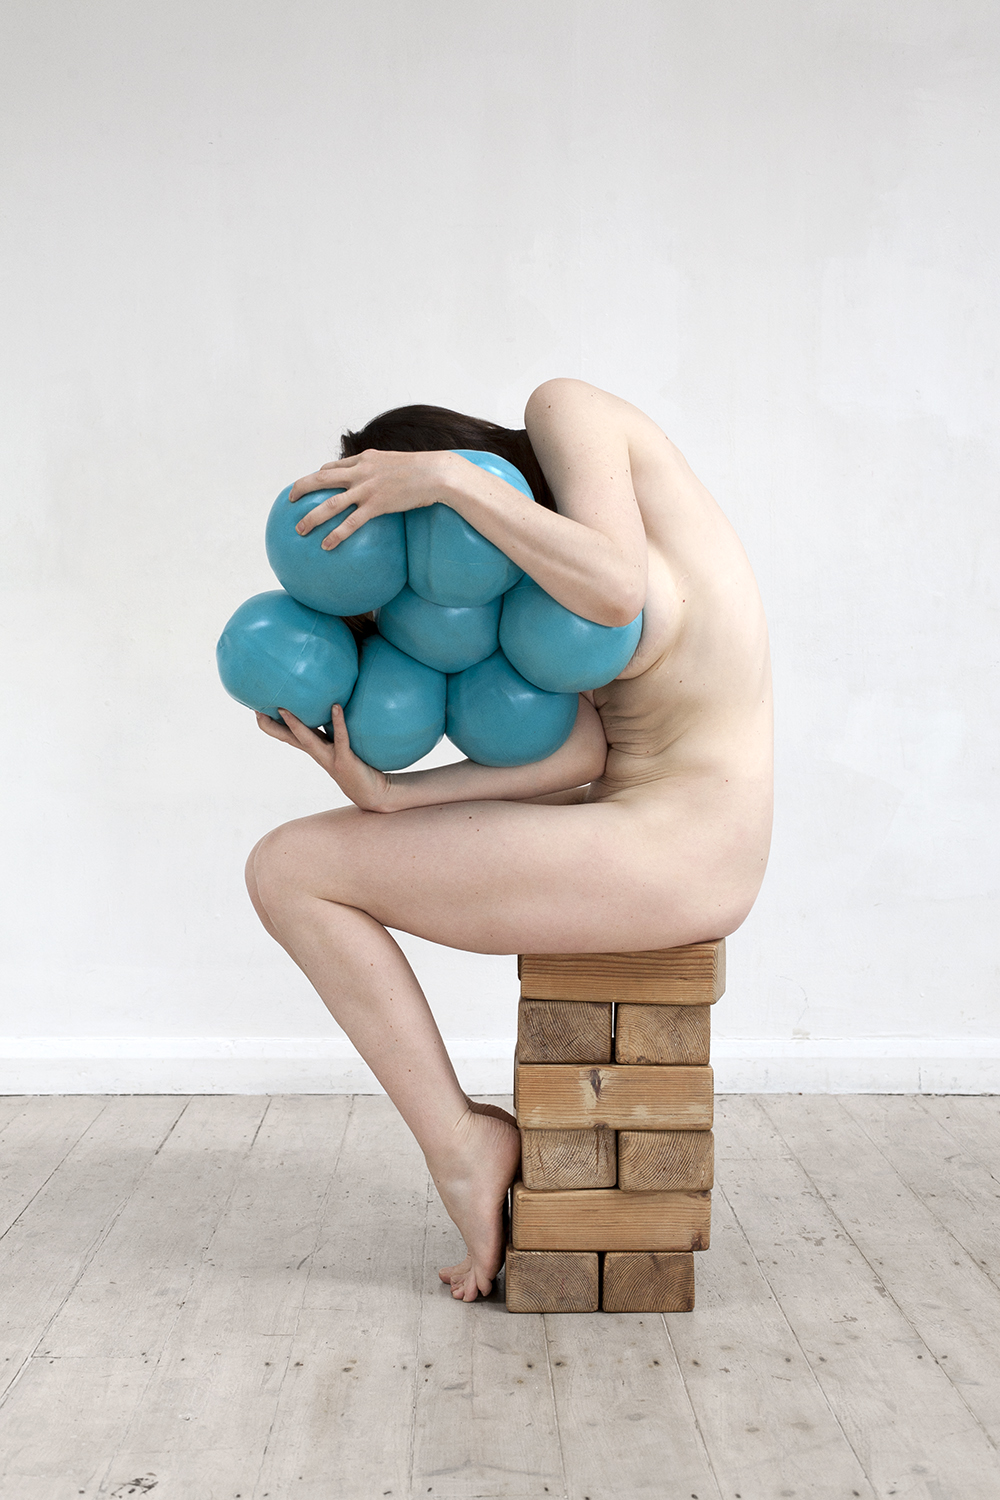 From the A Picture of Health exhibition, a naked woman clutches large squishy blue balls as she's sat on a stack of bricks hunched over